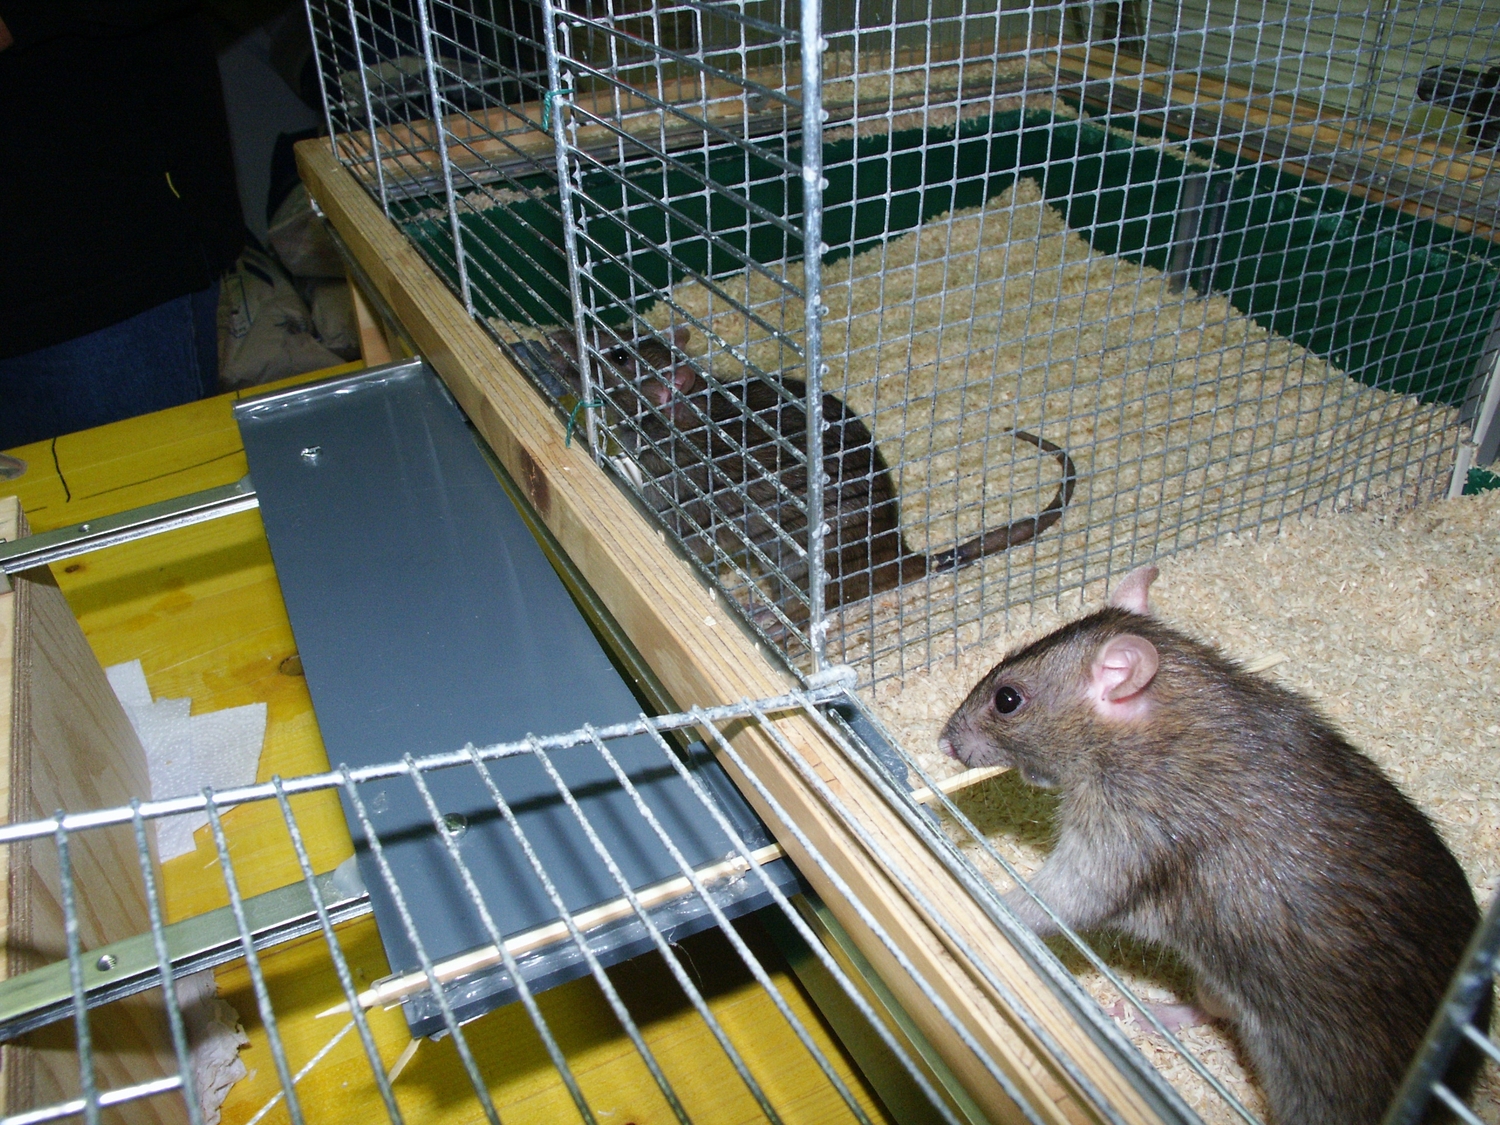 The researchers investigated what affects the helpfulness of rats